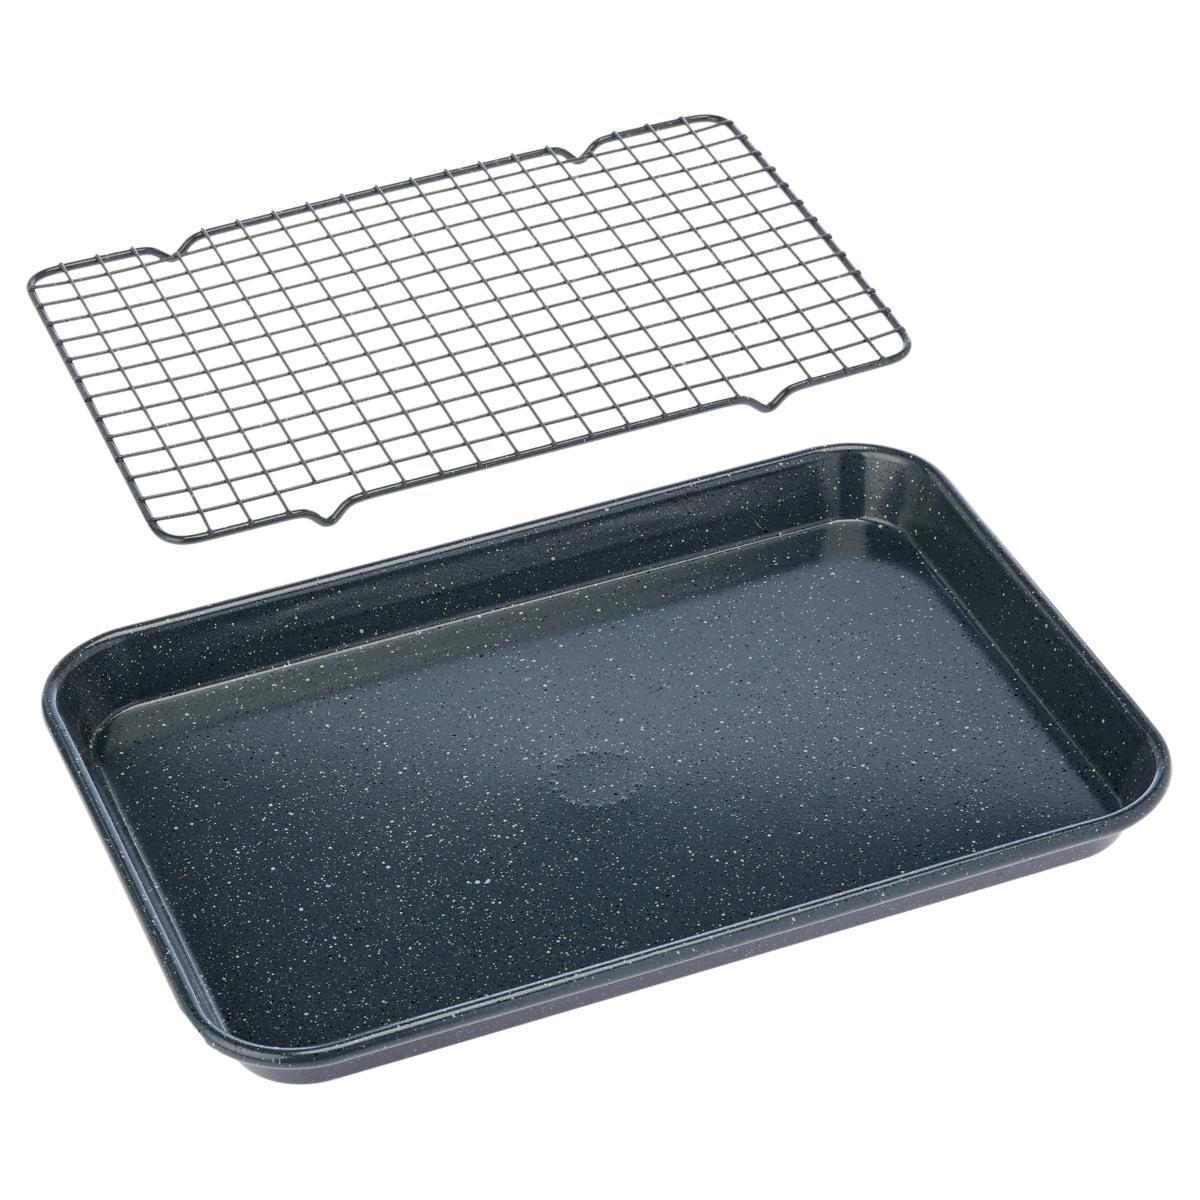 Curtis Stone 9" x 13" Sheet Pan with Universal Nonstick Wire Rack - 21071604 | HSN | HSN